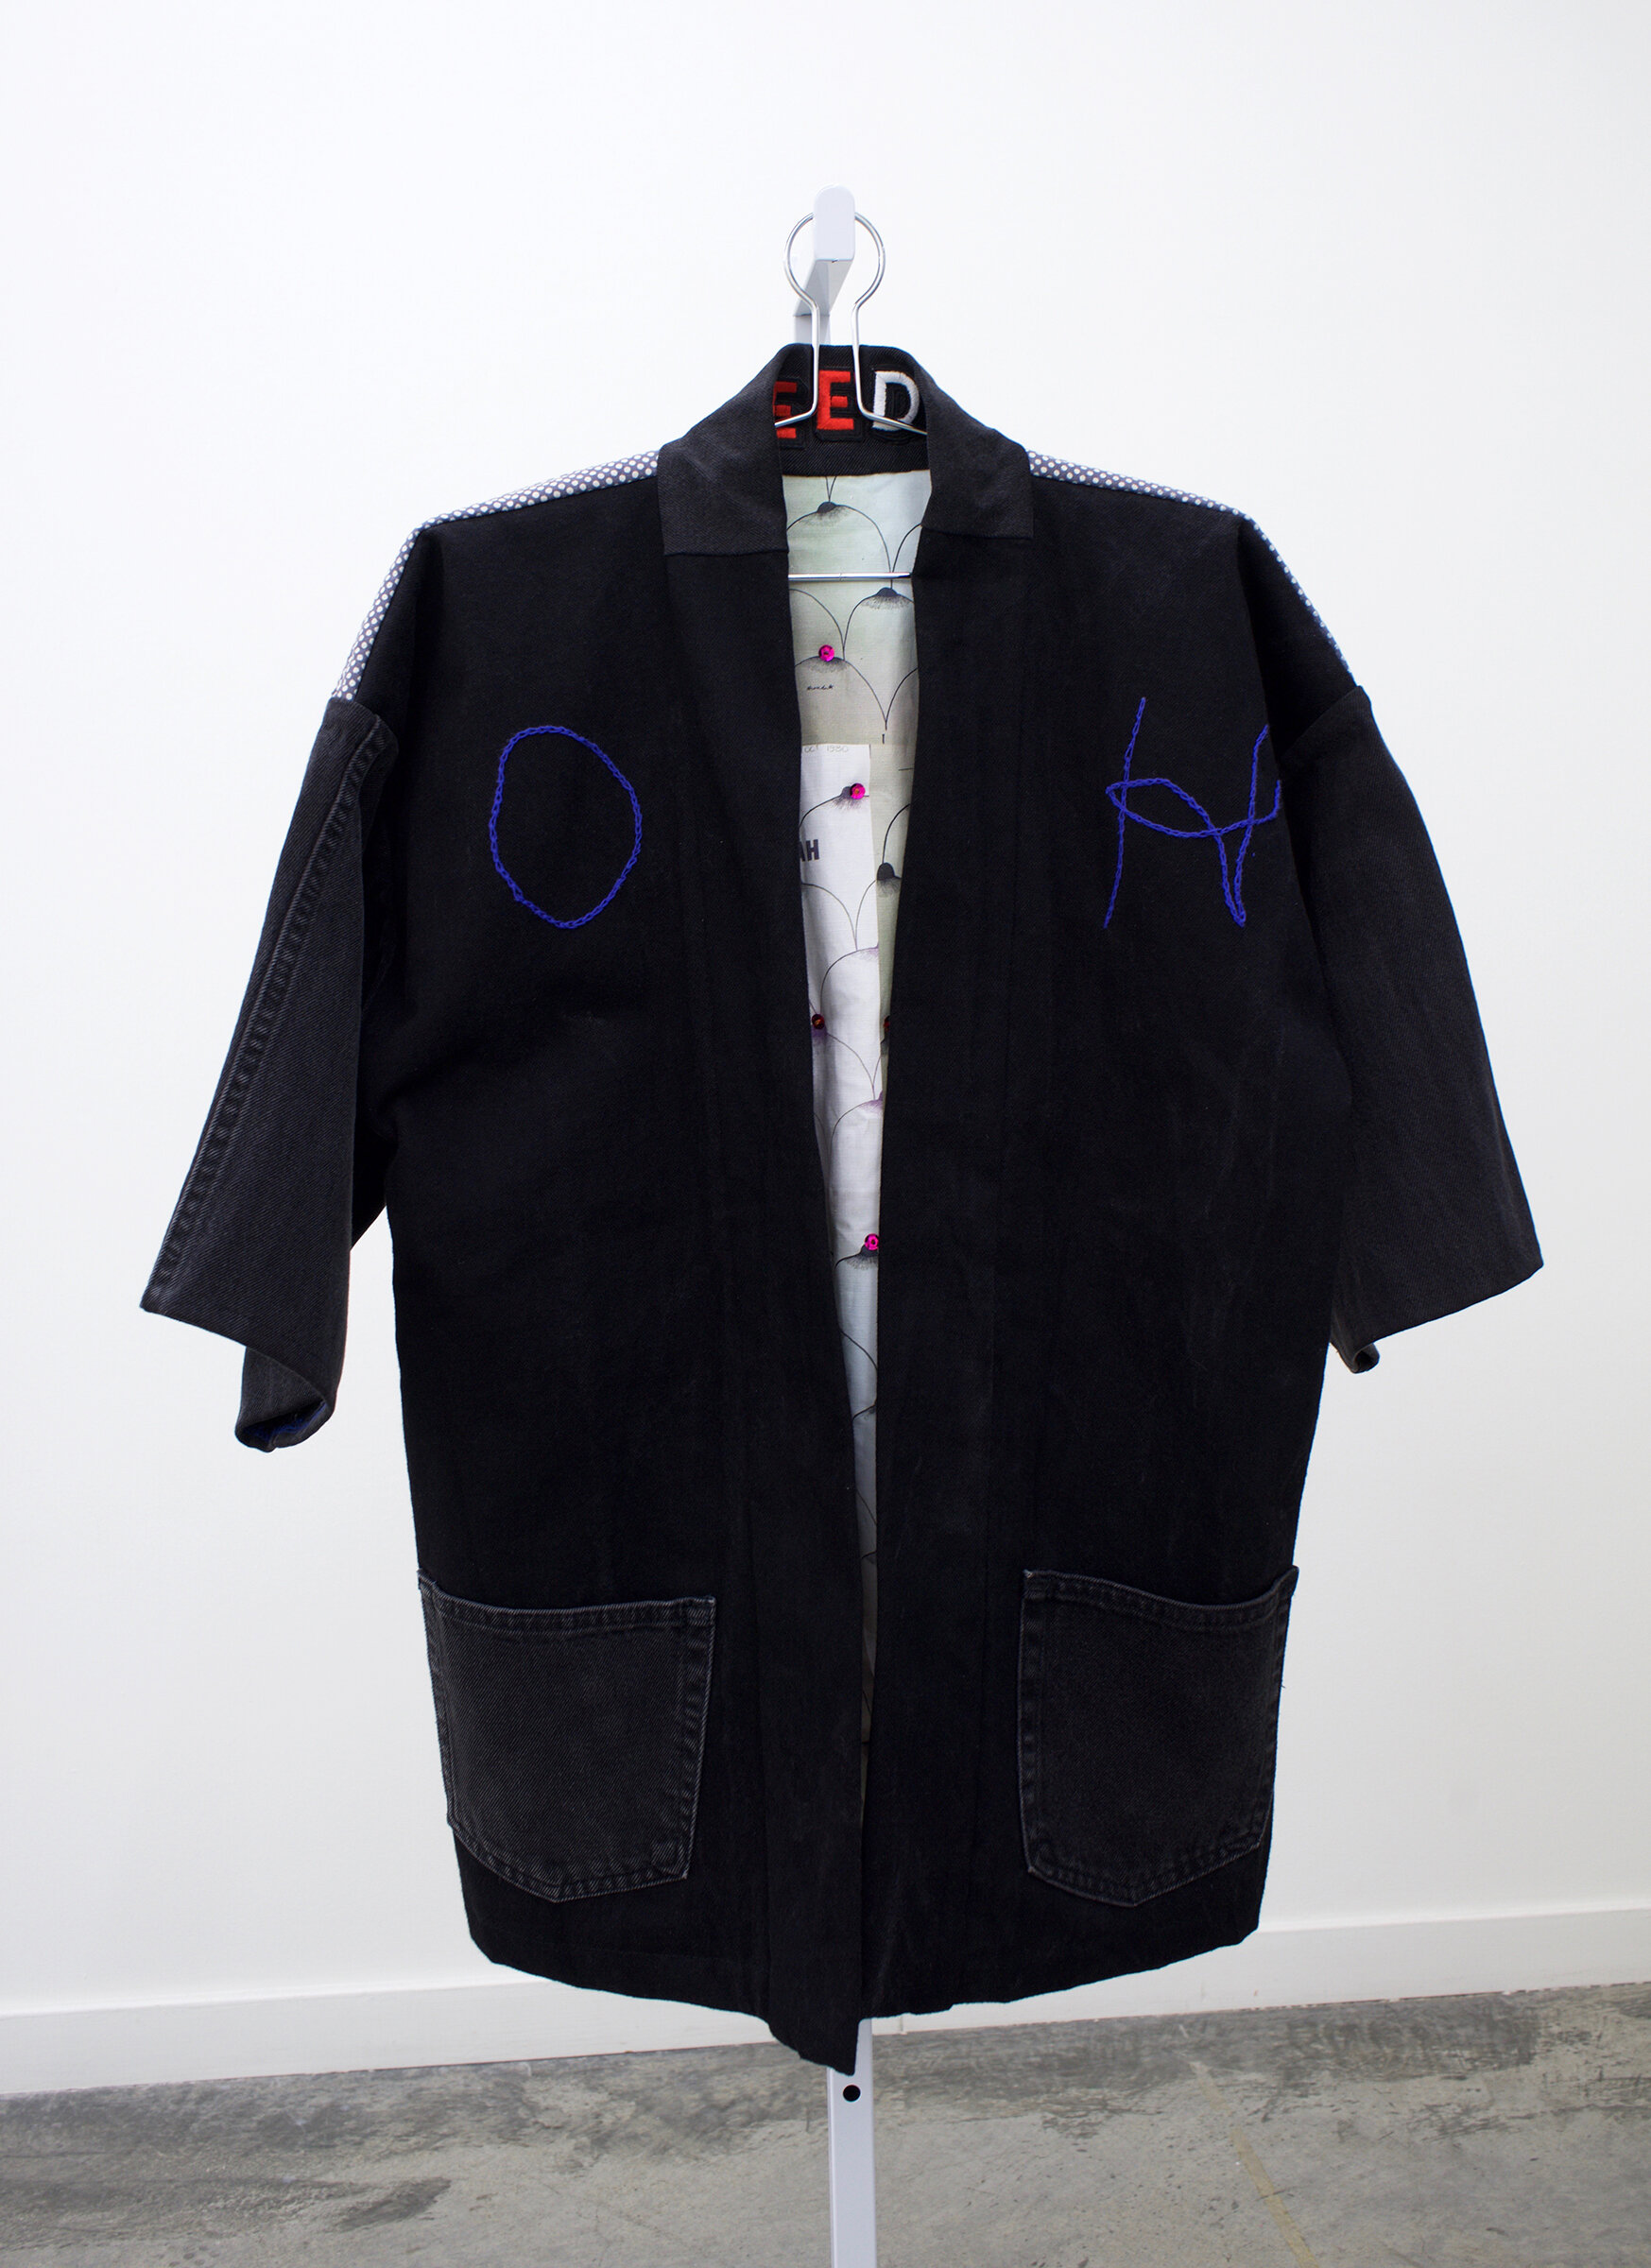  AMANDA CURRERI  O.H. Coat , 2019&nbsp; Recycled denim, hand-dyed, screen printed, and digitally-printed cottons, embroidery, batting, and sequins, 33” x 23” 